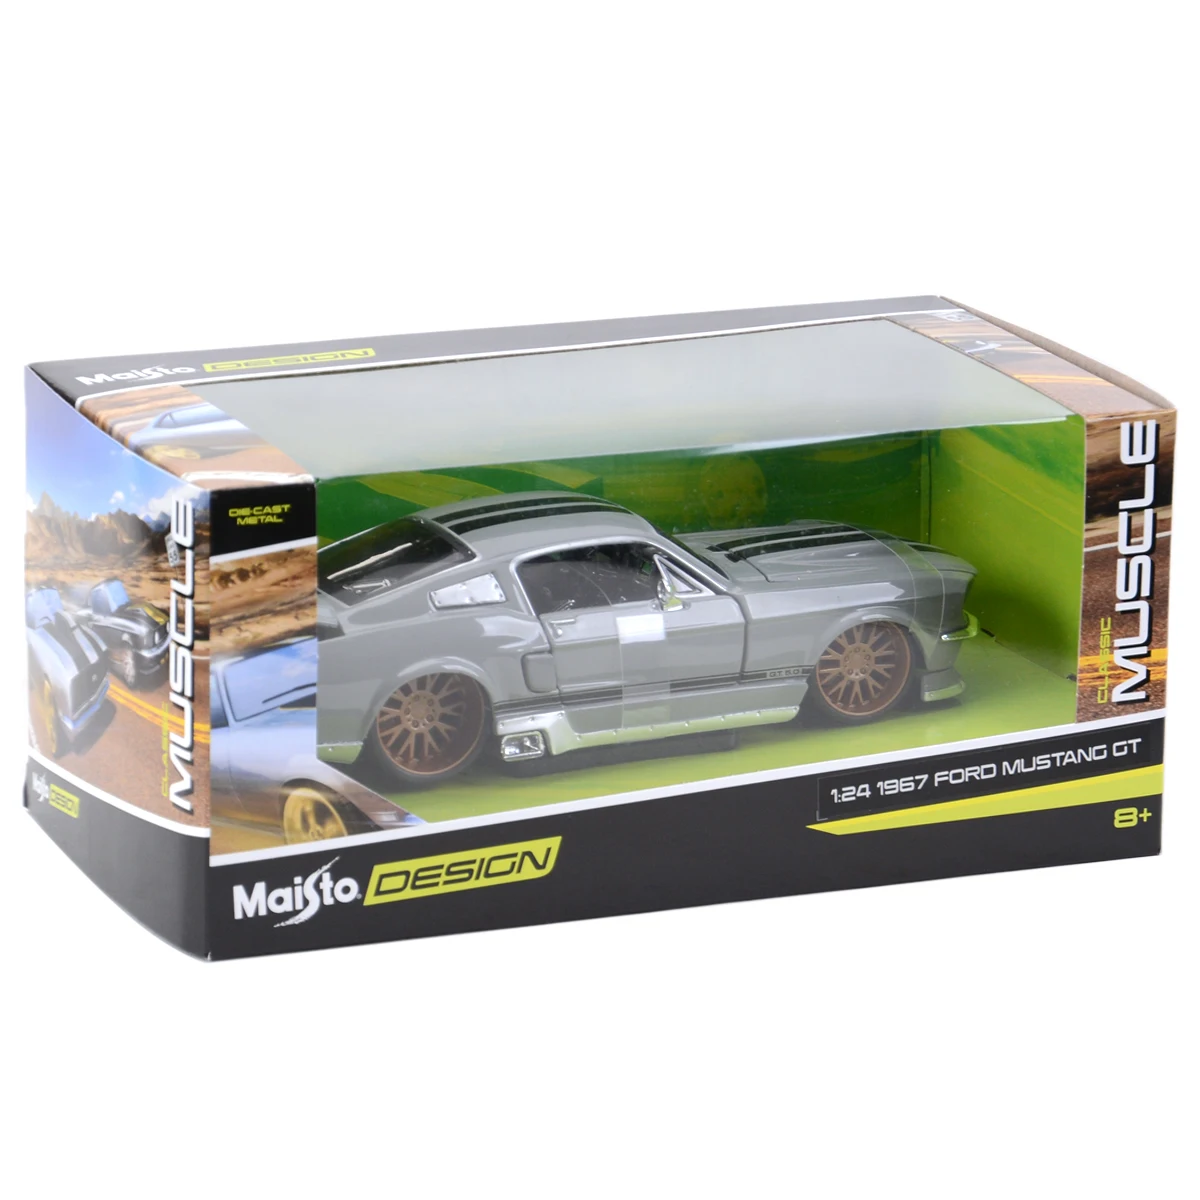 

Maisto 1:24 1967 Ford Mustang GT Sports Car Static Die Cast Vehicles Collectible Model Car Toys